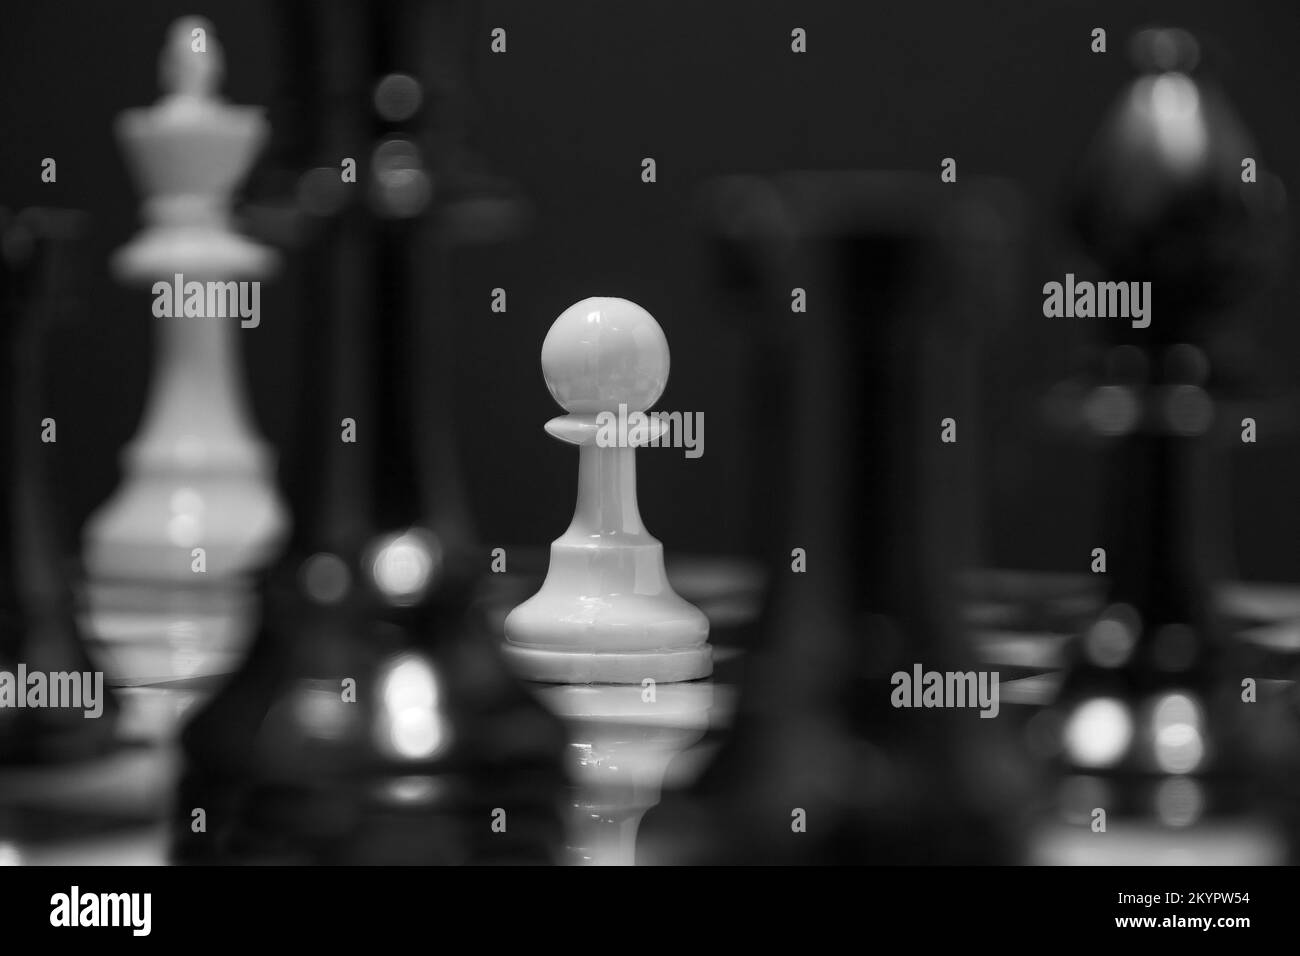 Protection at All Costs: This black and white image presents a single Pawn with the challenge of protecting its King. Stock Photo